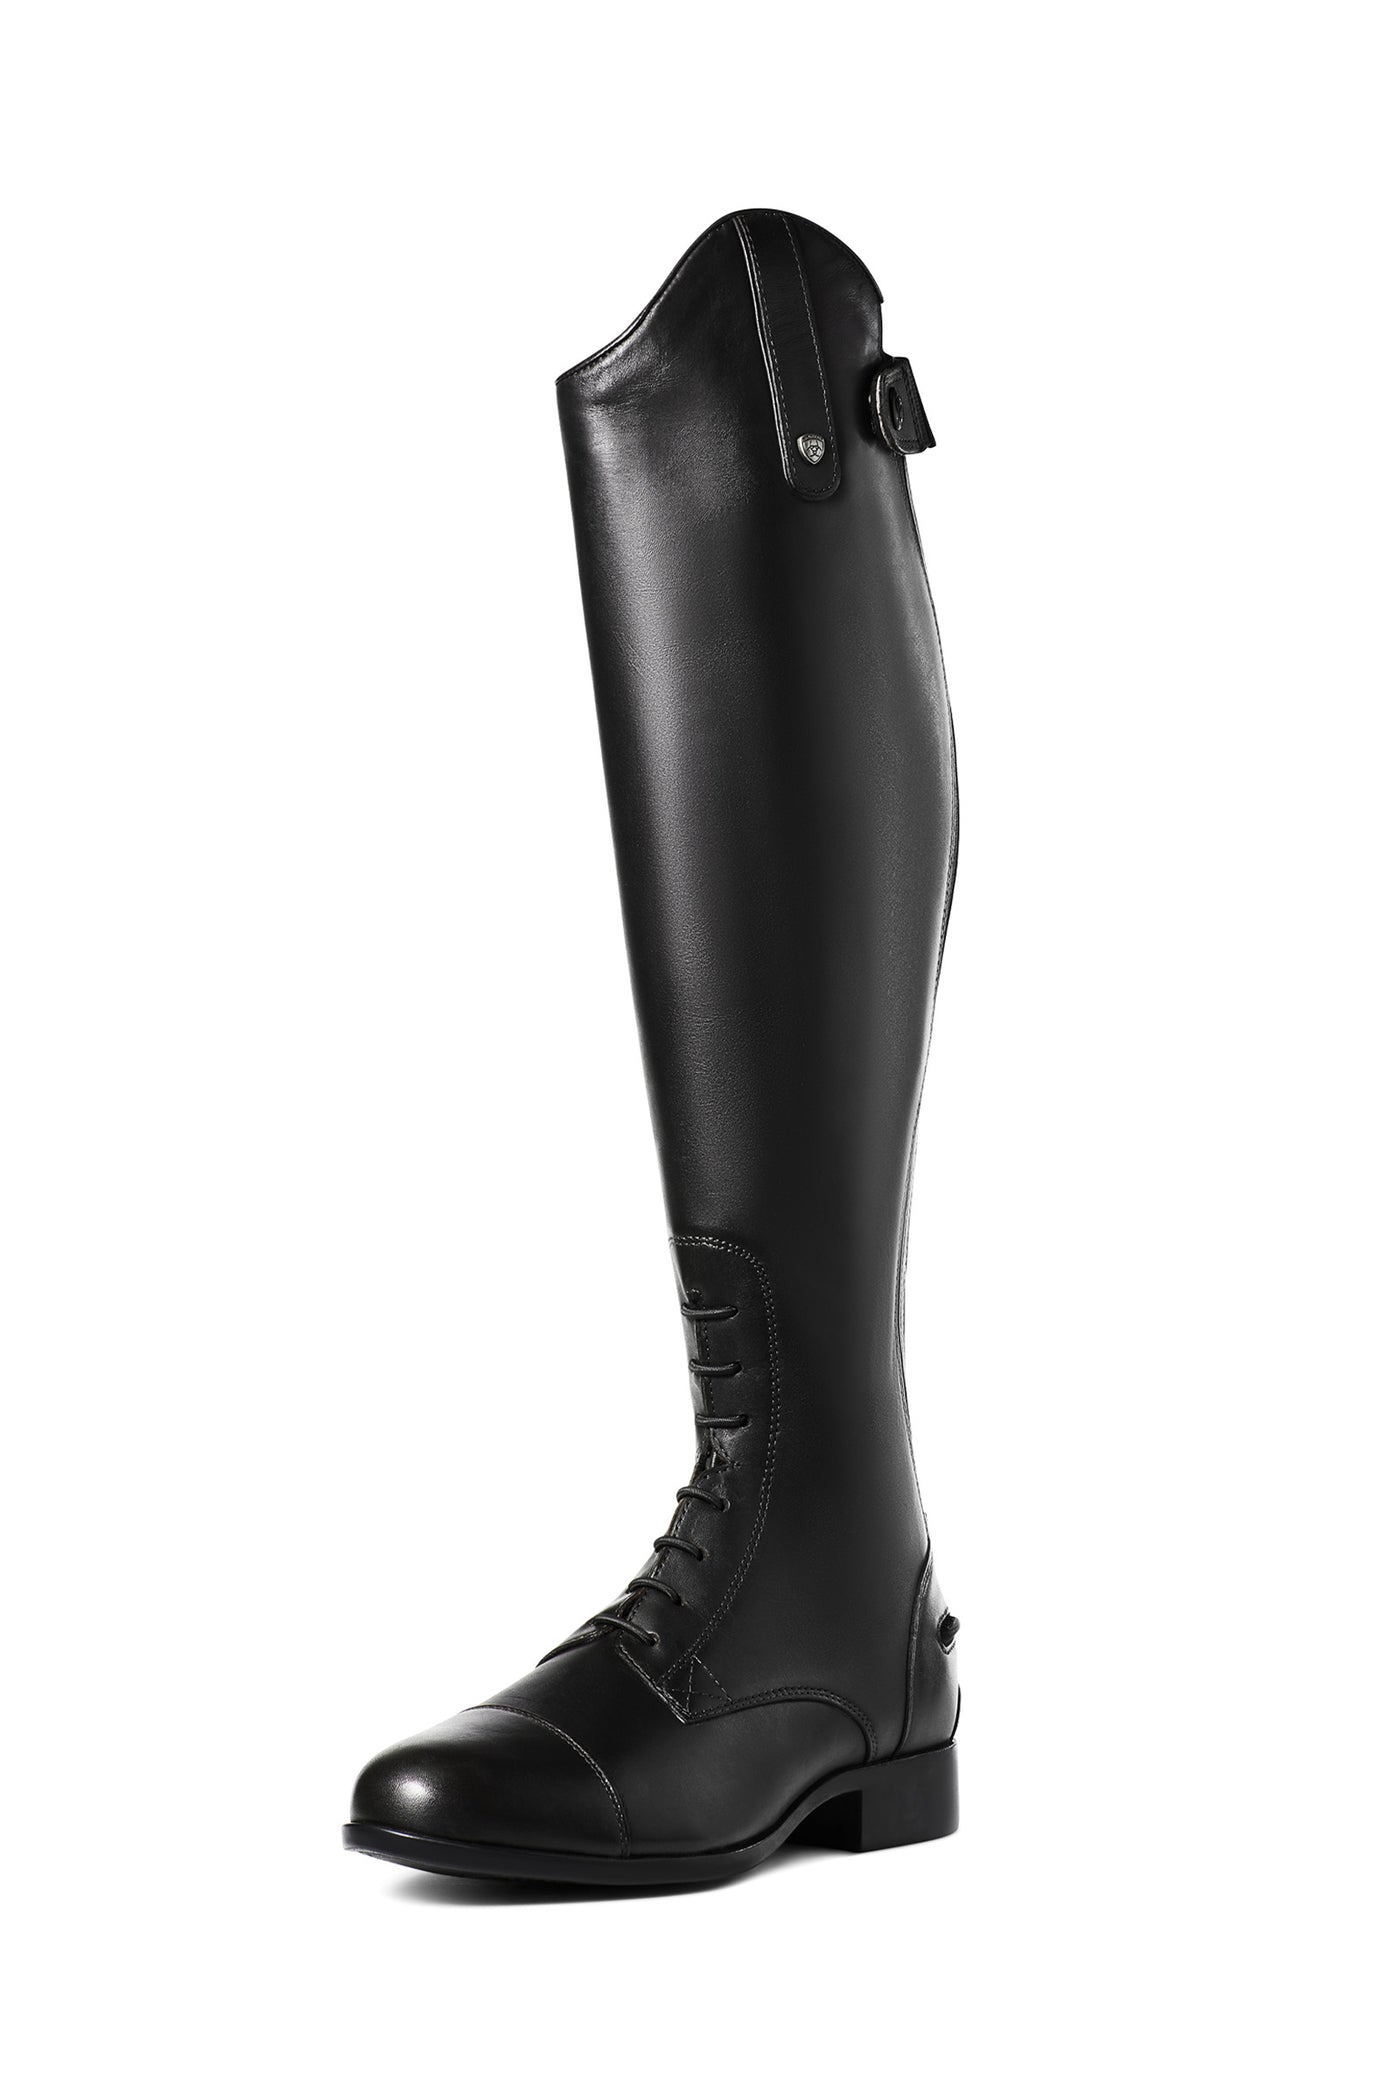 Ariat Heritage Tall Boots -  Black